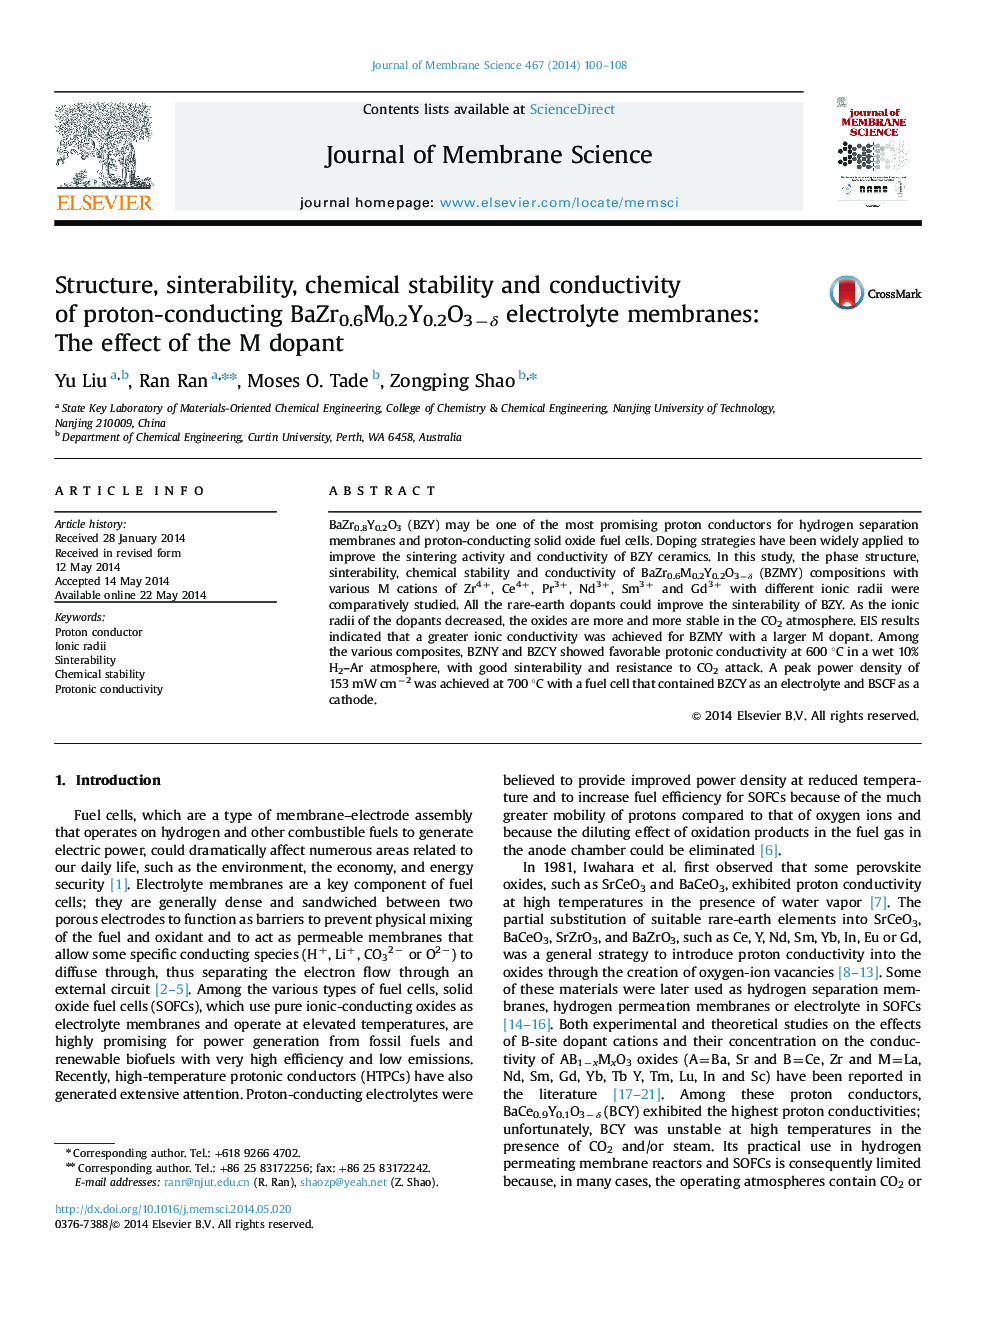 Structure, sinterability, chemical stability and conductivity of proton-conducting BaZr0.6M0.2Y0.2O3−δ electrolyte membranes: The effect of the M dopant